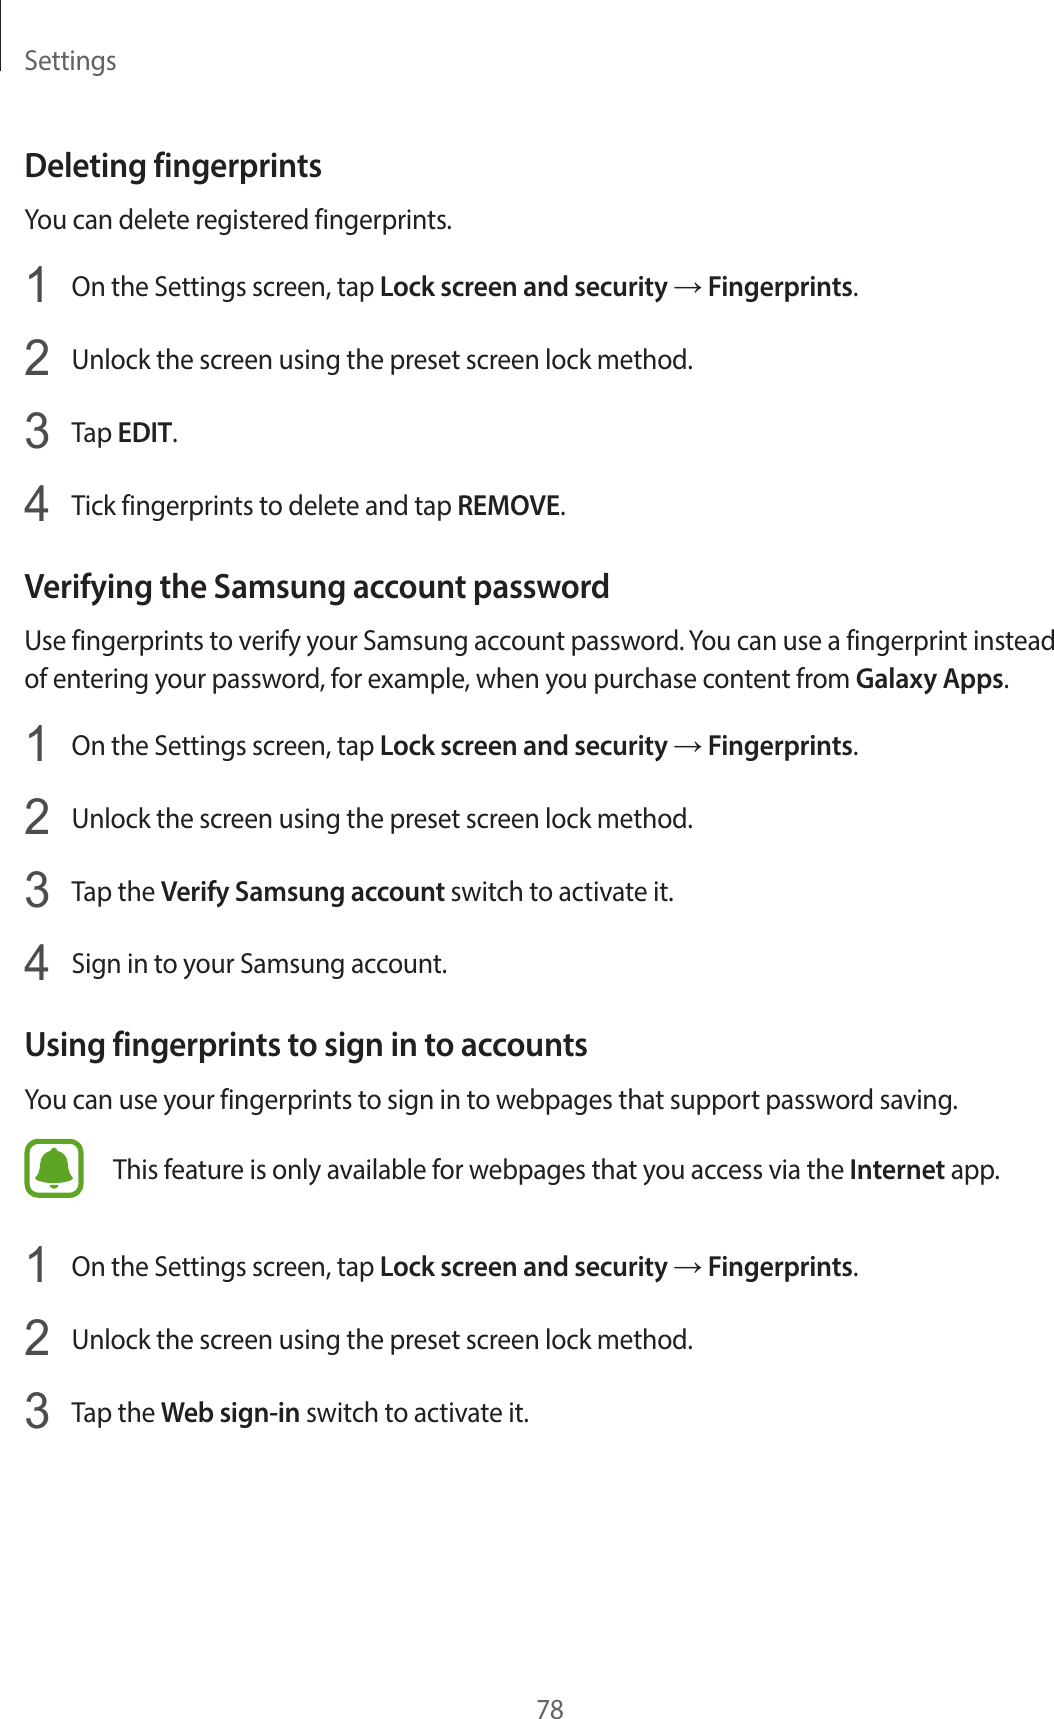 Settings78Deleting fingerprintsYou can delete registered fingerprints.1  On the Settings screen, tap Lock screen and security → Fingerprints.2  Unlock the screen using the preset screen lock method.3  Tap EDIT.4  Tick fingerprints to delete and tap REMOVE.Verifying the Samsung account passwordUse fingerprints to verify your Samsung account password. You can use a fingerprint instead of entering your password, for example, when you purchase content from Galaxy Apps.1  On the Settings screen, tap Lock screen and security → Fingerprints.2  Unlock the screen using the preset screen lock method.3  Tap the Verify Samsung account switch to activate it.4  Sign in to your Samsung account.Using fingerprints to sign in to accountsYou can use your fingerprints to sign in to webpages that support password saving.This feature is only available for webpages that you access via the Internet app.1  On the Settings screen, tap Lock screen and security → Fingerprints.2  Unlock the screen using the preset screen lock method.3  Tap the Web sign-in switch to activate it.